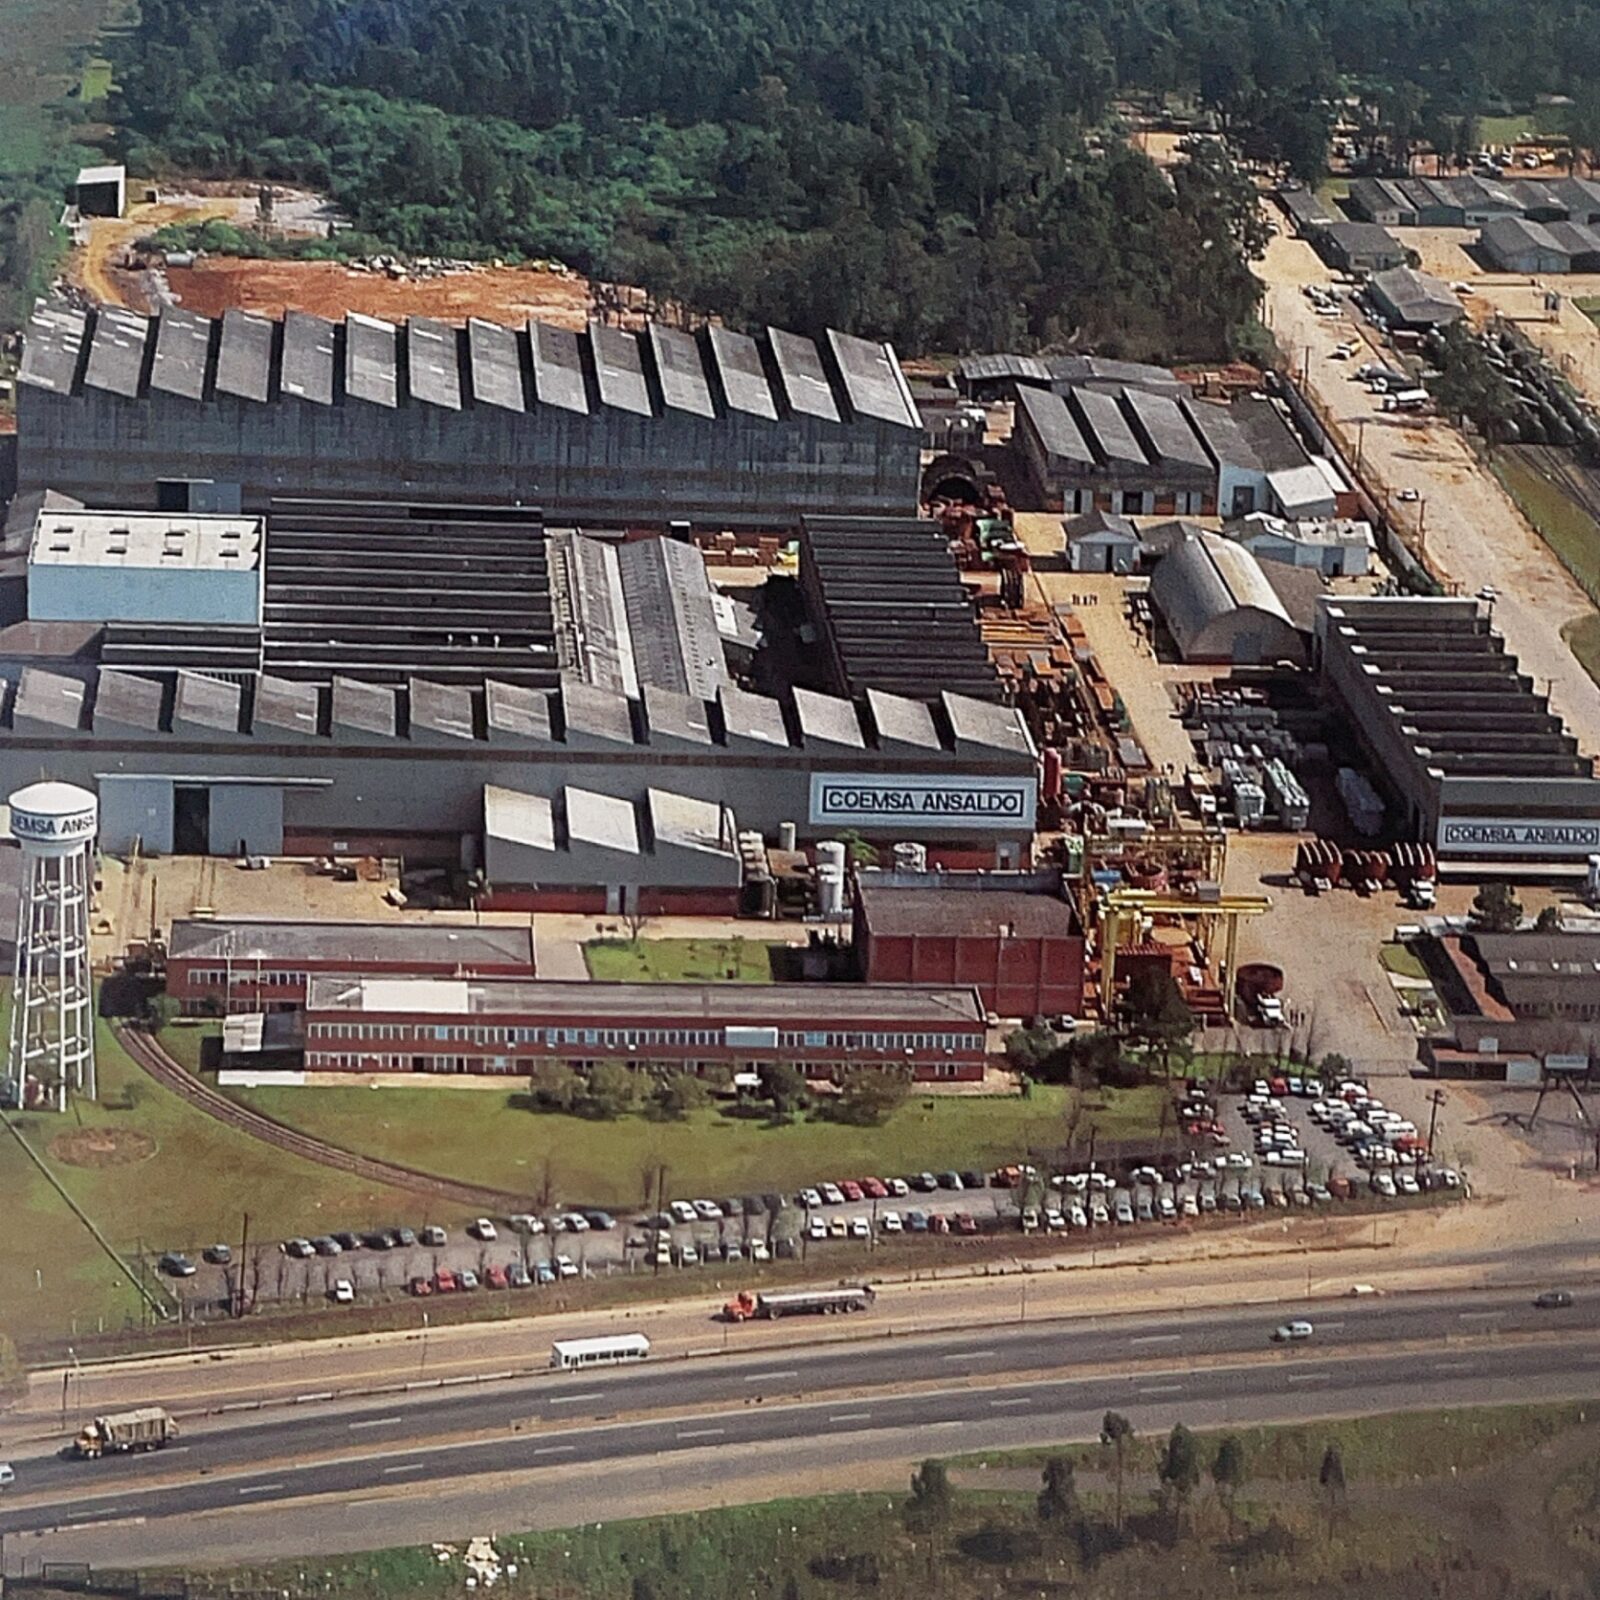 Coemsa Ansaldo manufacturing plant founded in 1960